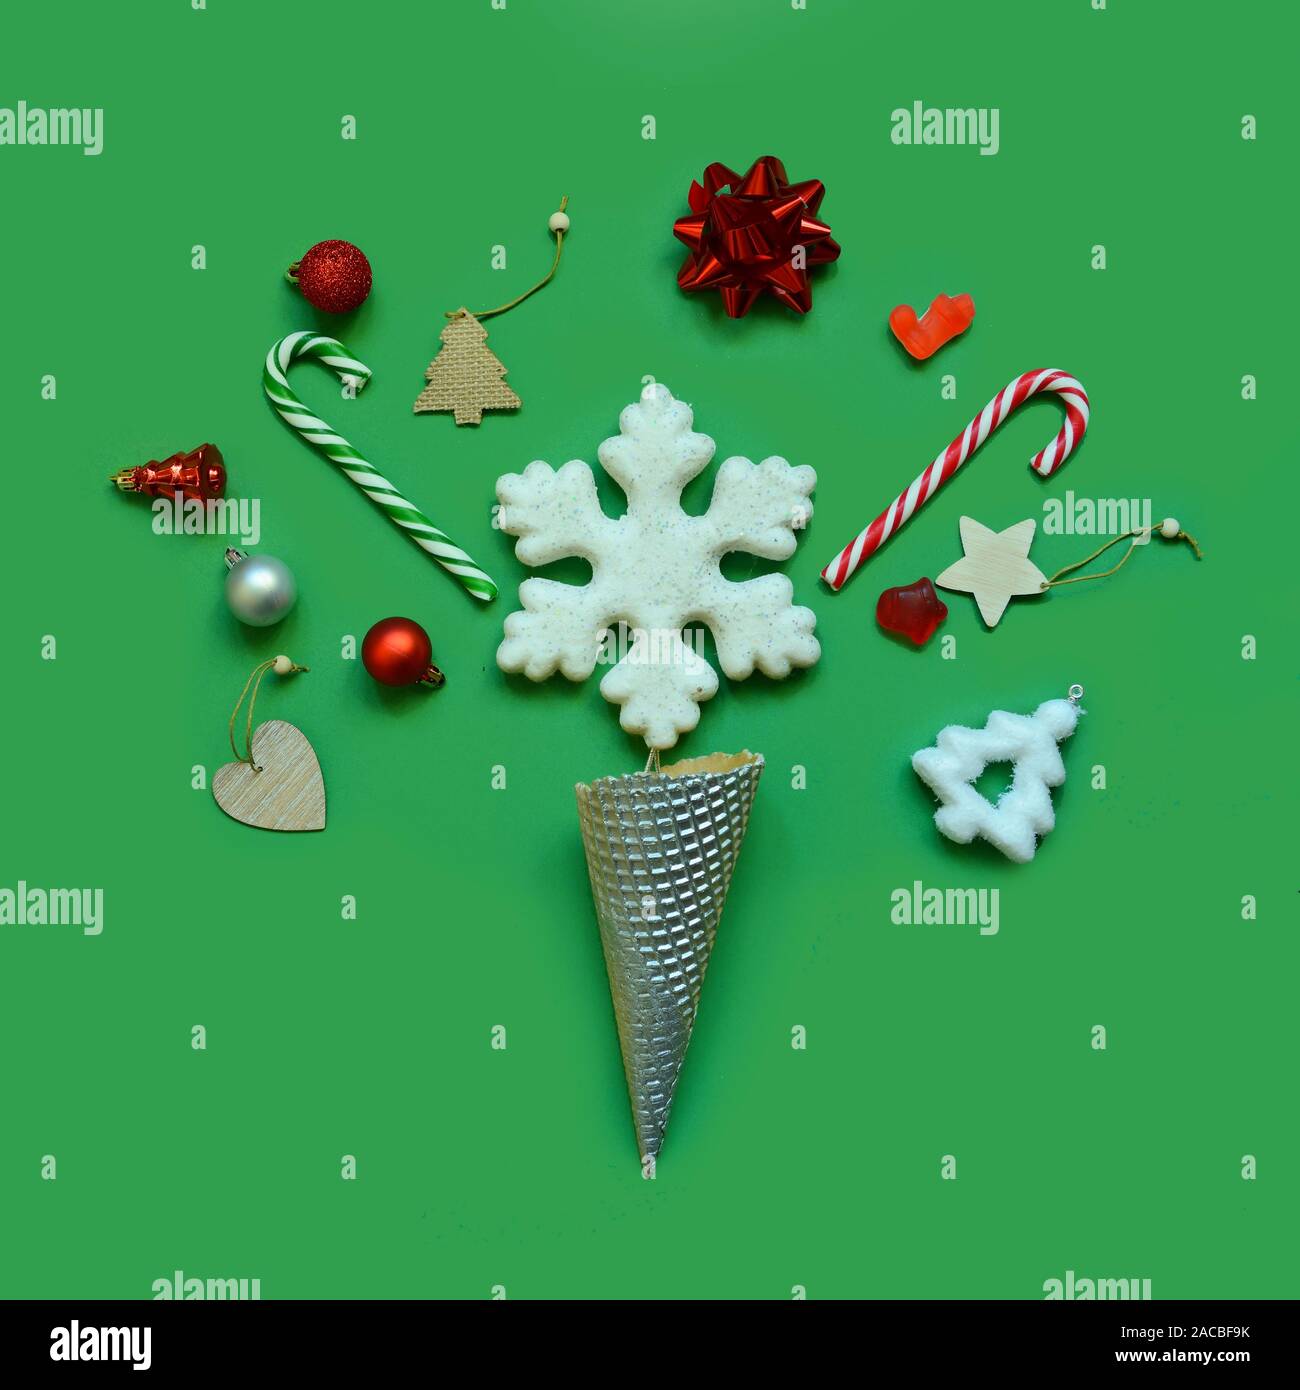 Trendy creative ice cream cone with various Christmas objects Stock Photo